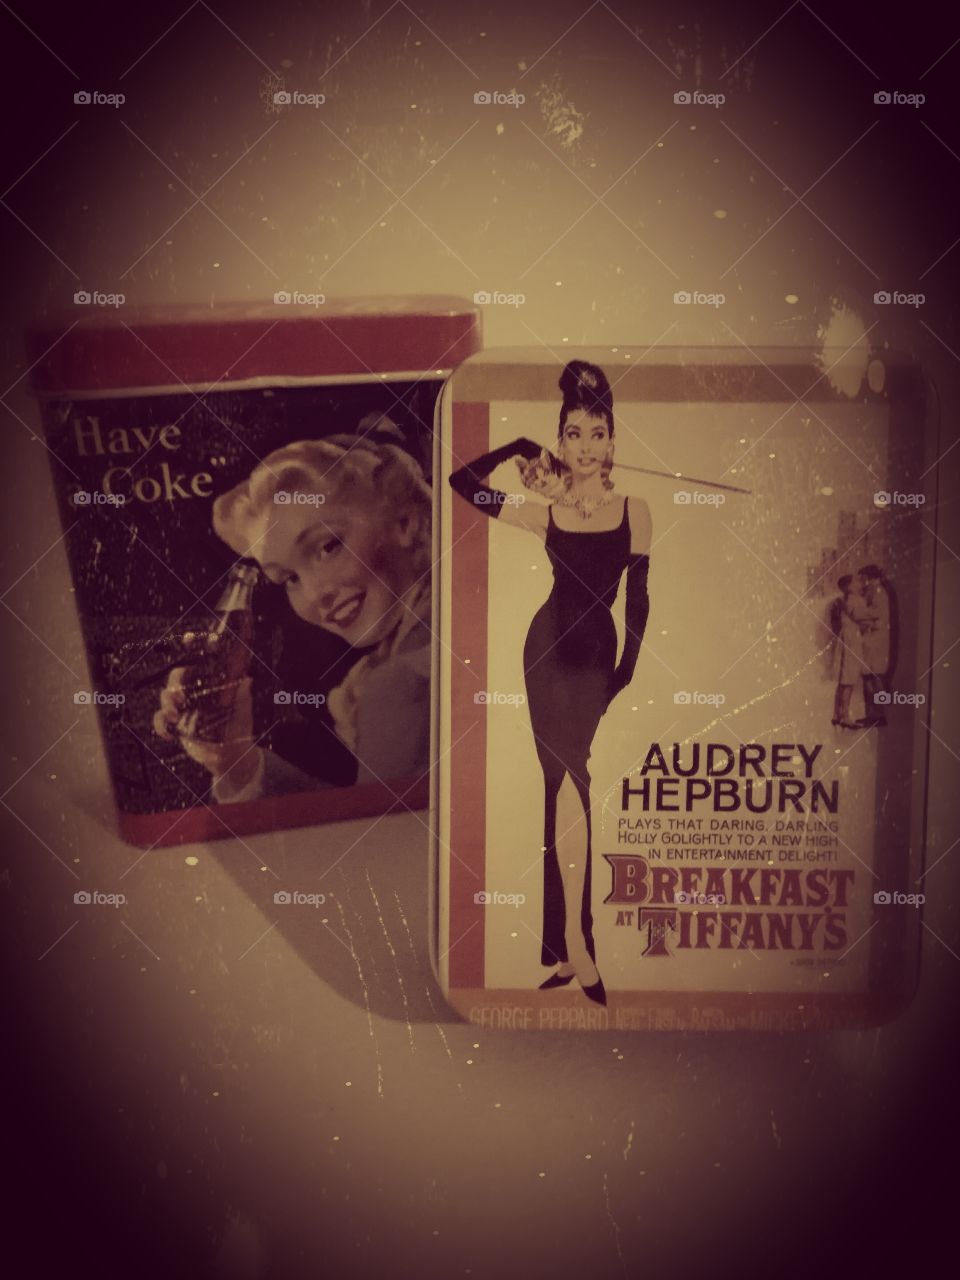 My fascination with tins. Golden oldies. Vintage tins. Audrey Hepburn in Breakfast at Tiffany's. Classic Coke in a bottle.